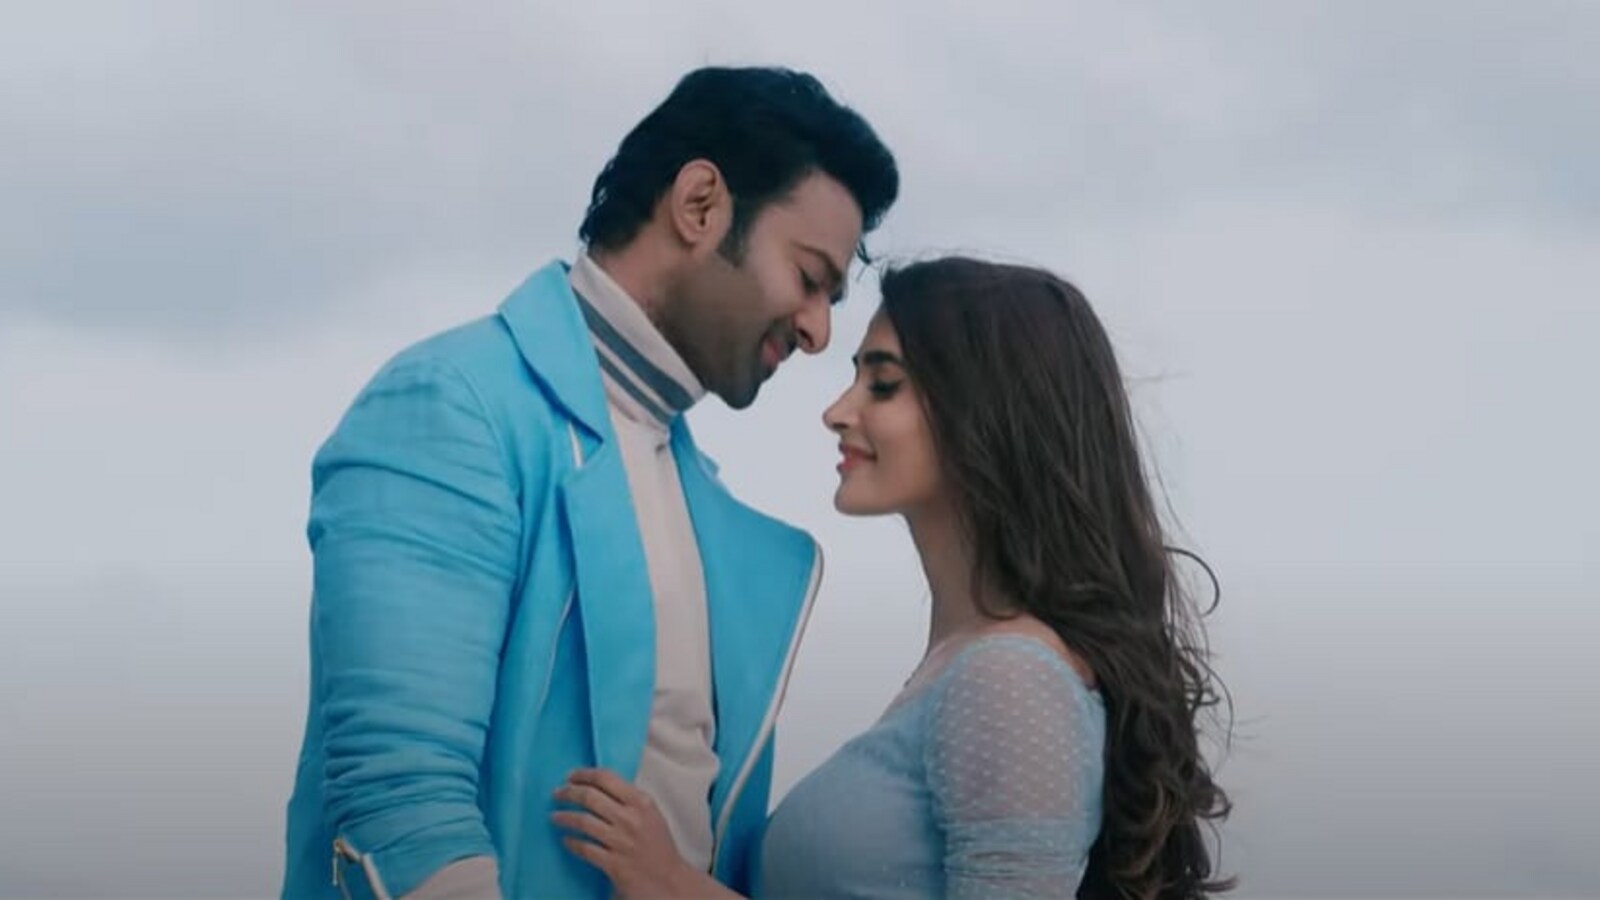 Prabhas says he feels uncomfortable doing kissing scenes and removing shirt: ‘In love story, I can’t even say no’